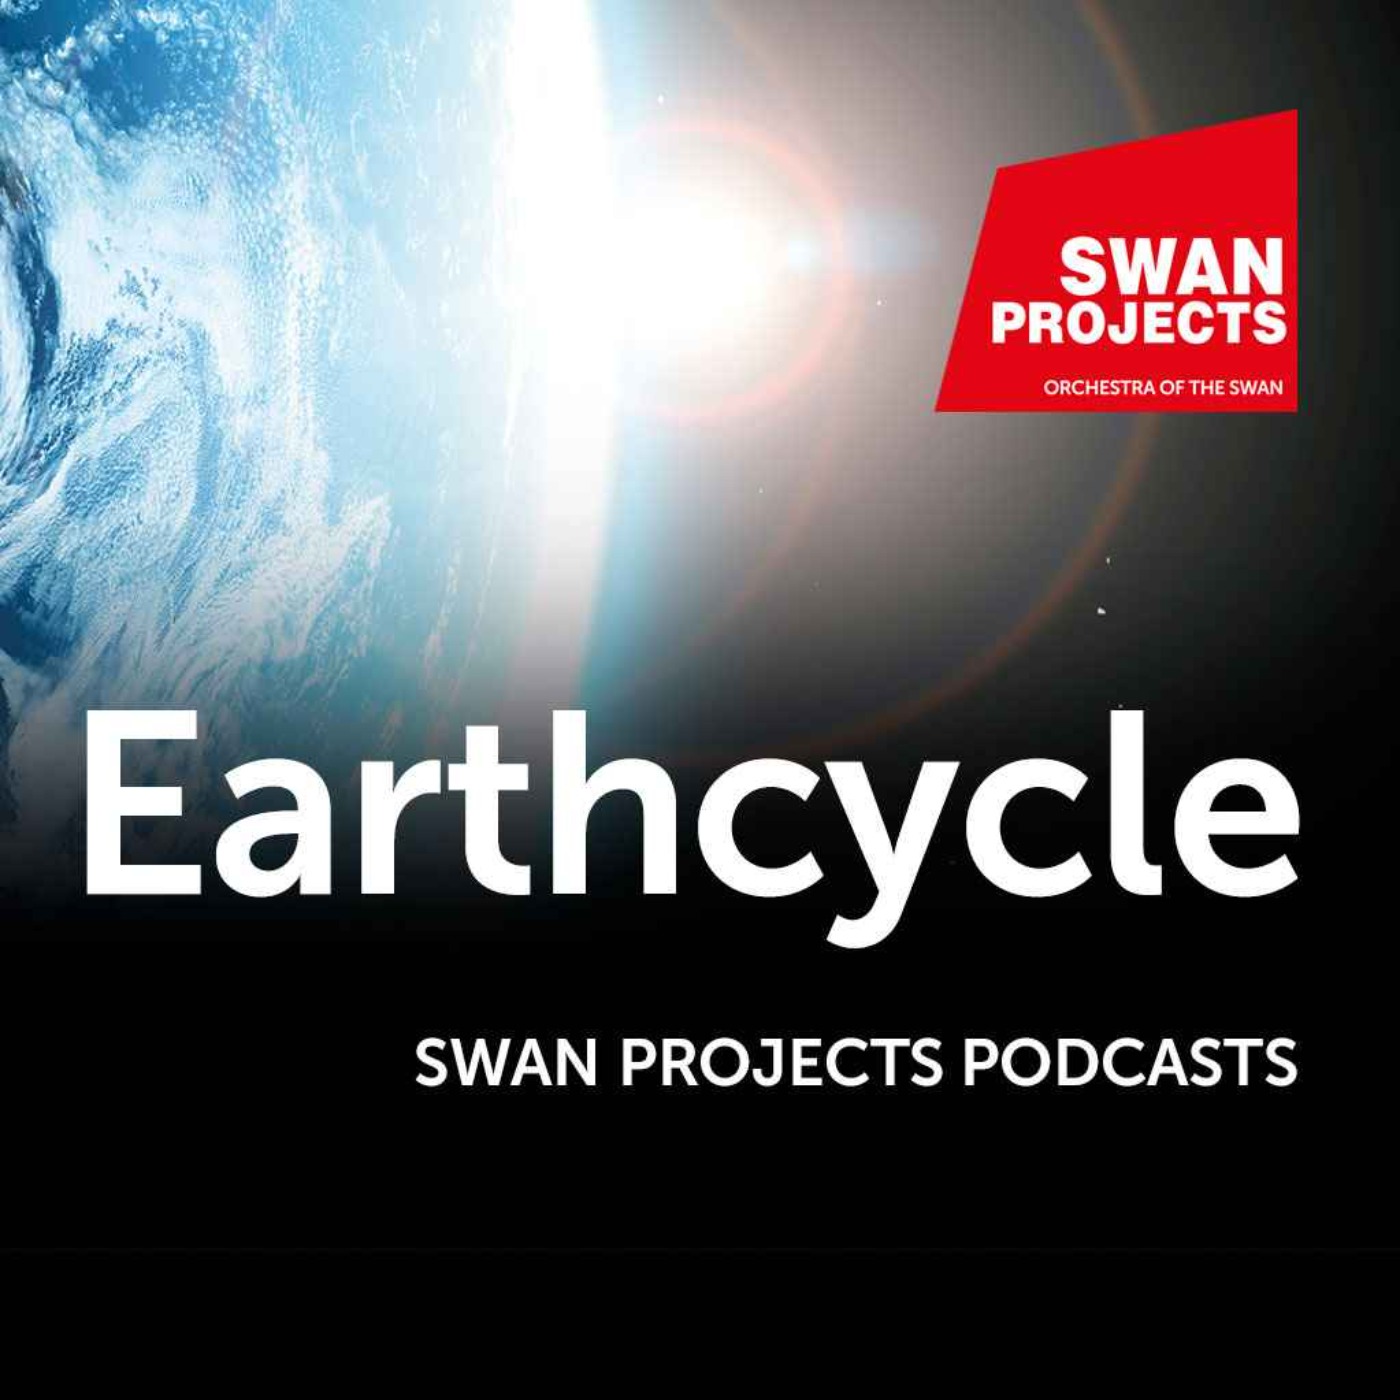 Earthcycle - A Swan Project Podcast with Madeleine Finlay Part 1